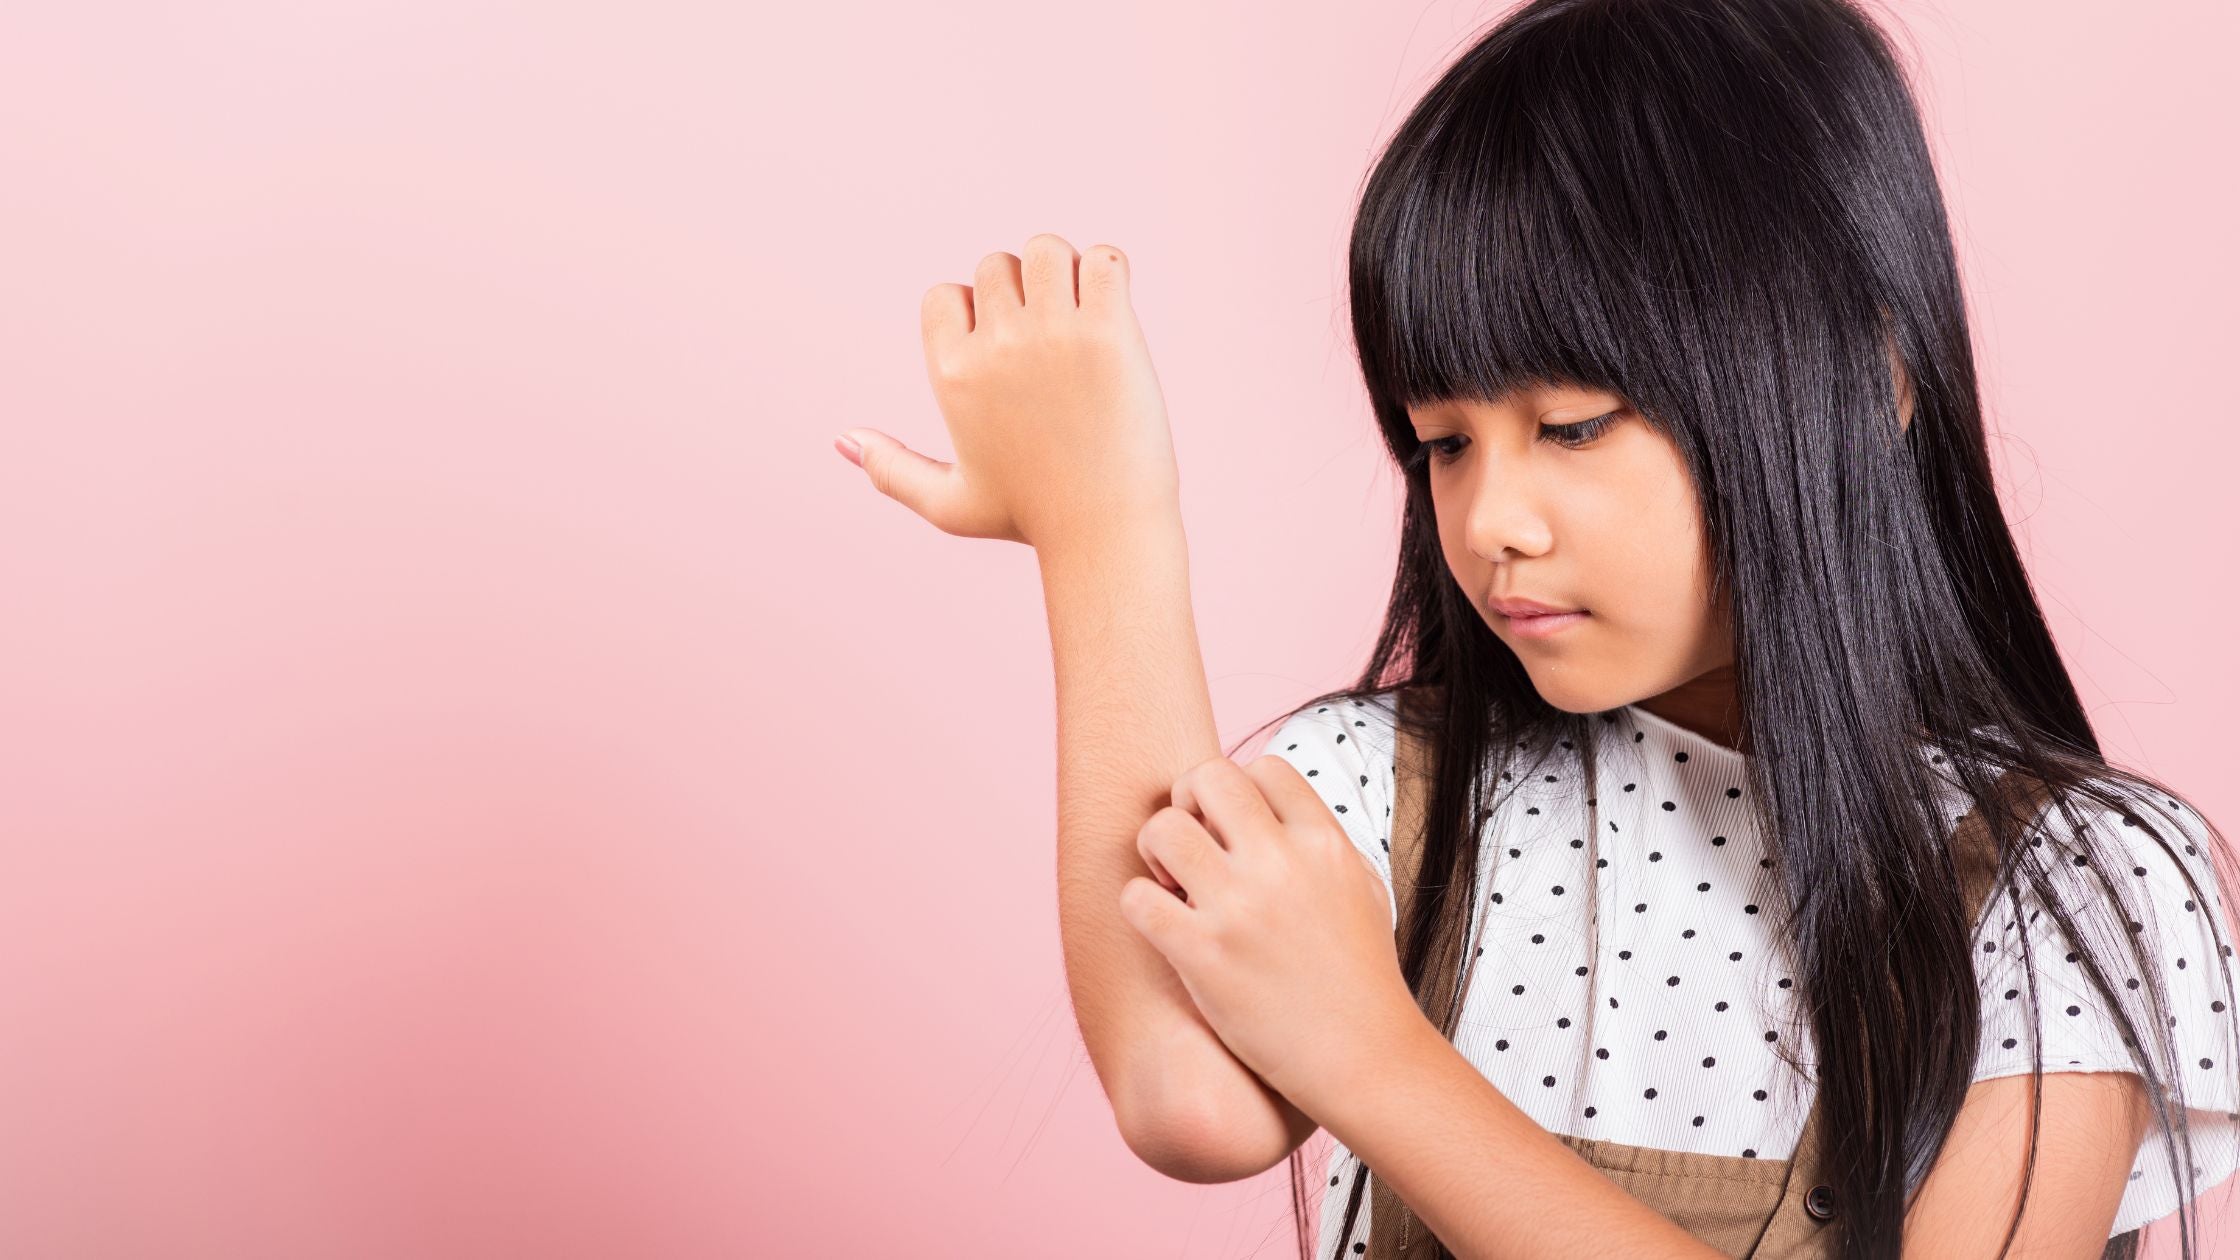 How to Help Your Child Stop Scratching Their Skin